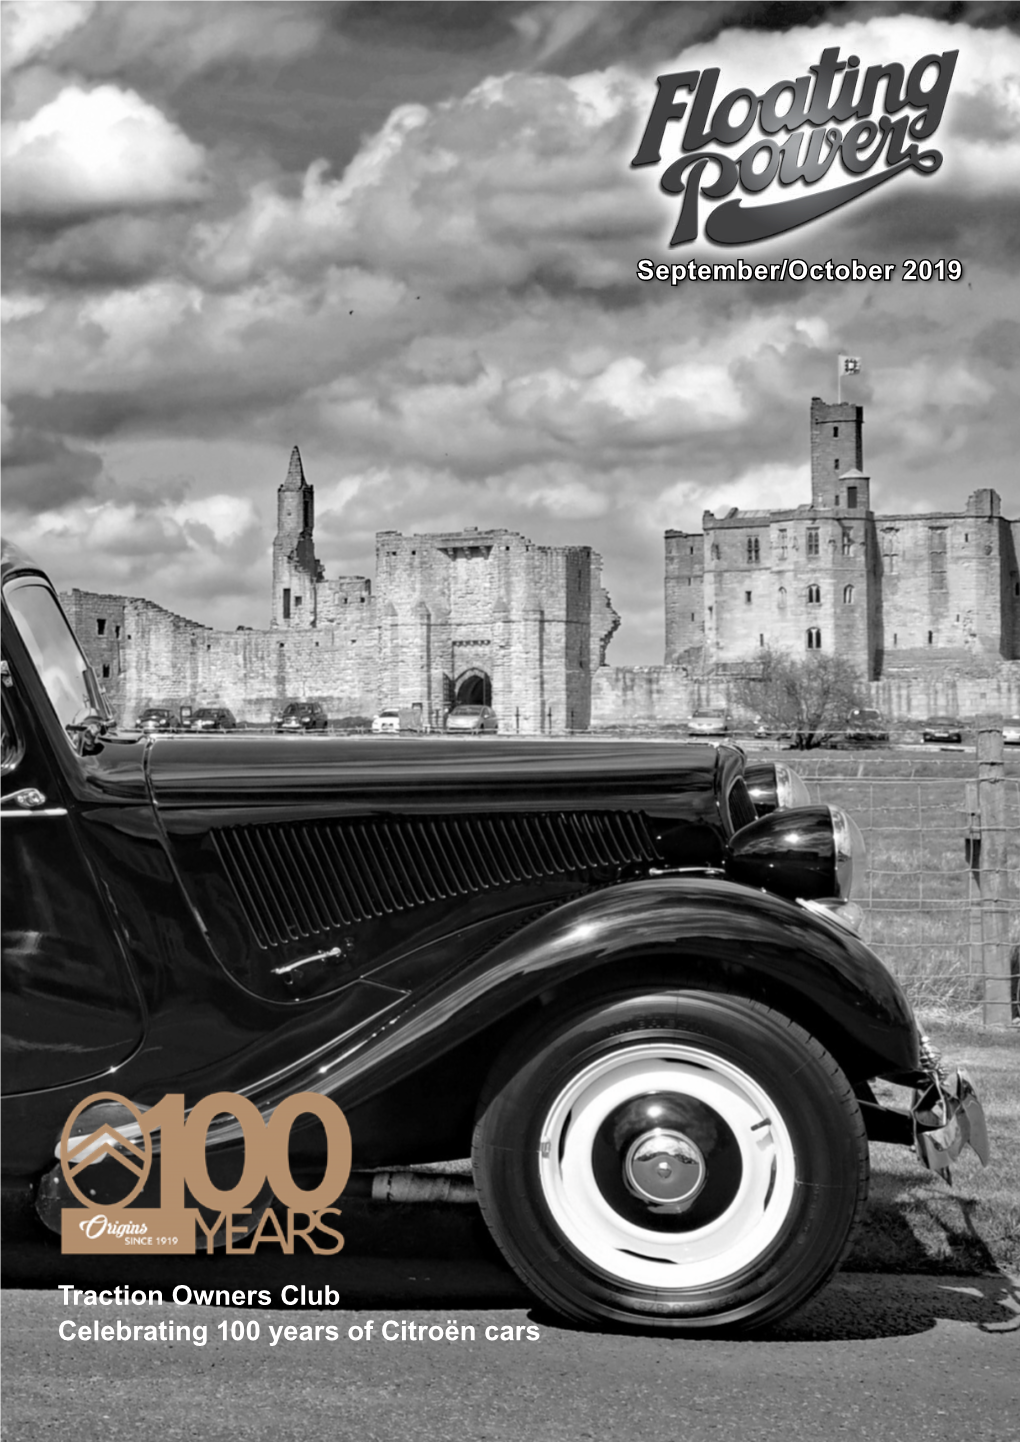 Traction Owners Club Celebrating 100 Years of Citroën Cars Editor Presented with the Requirement to Declare, Registration Will Complete Without an MOT